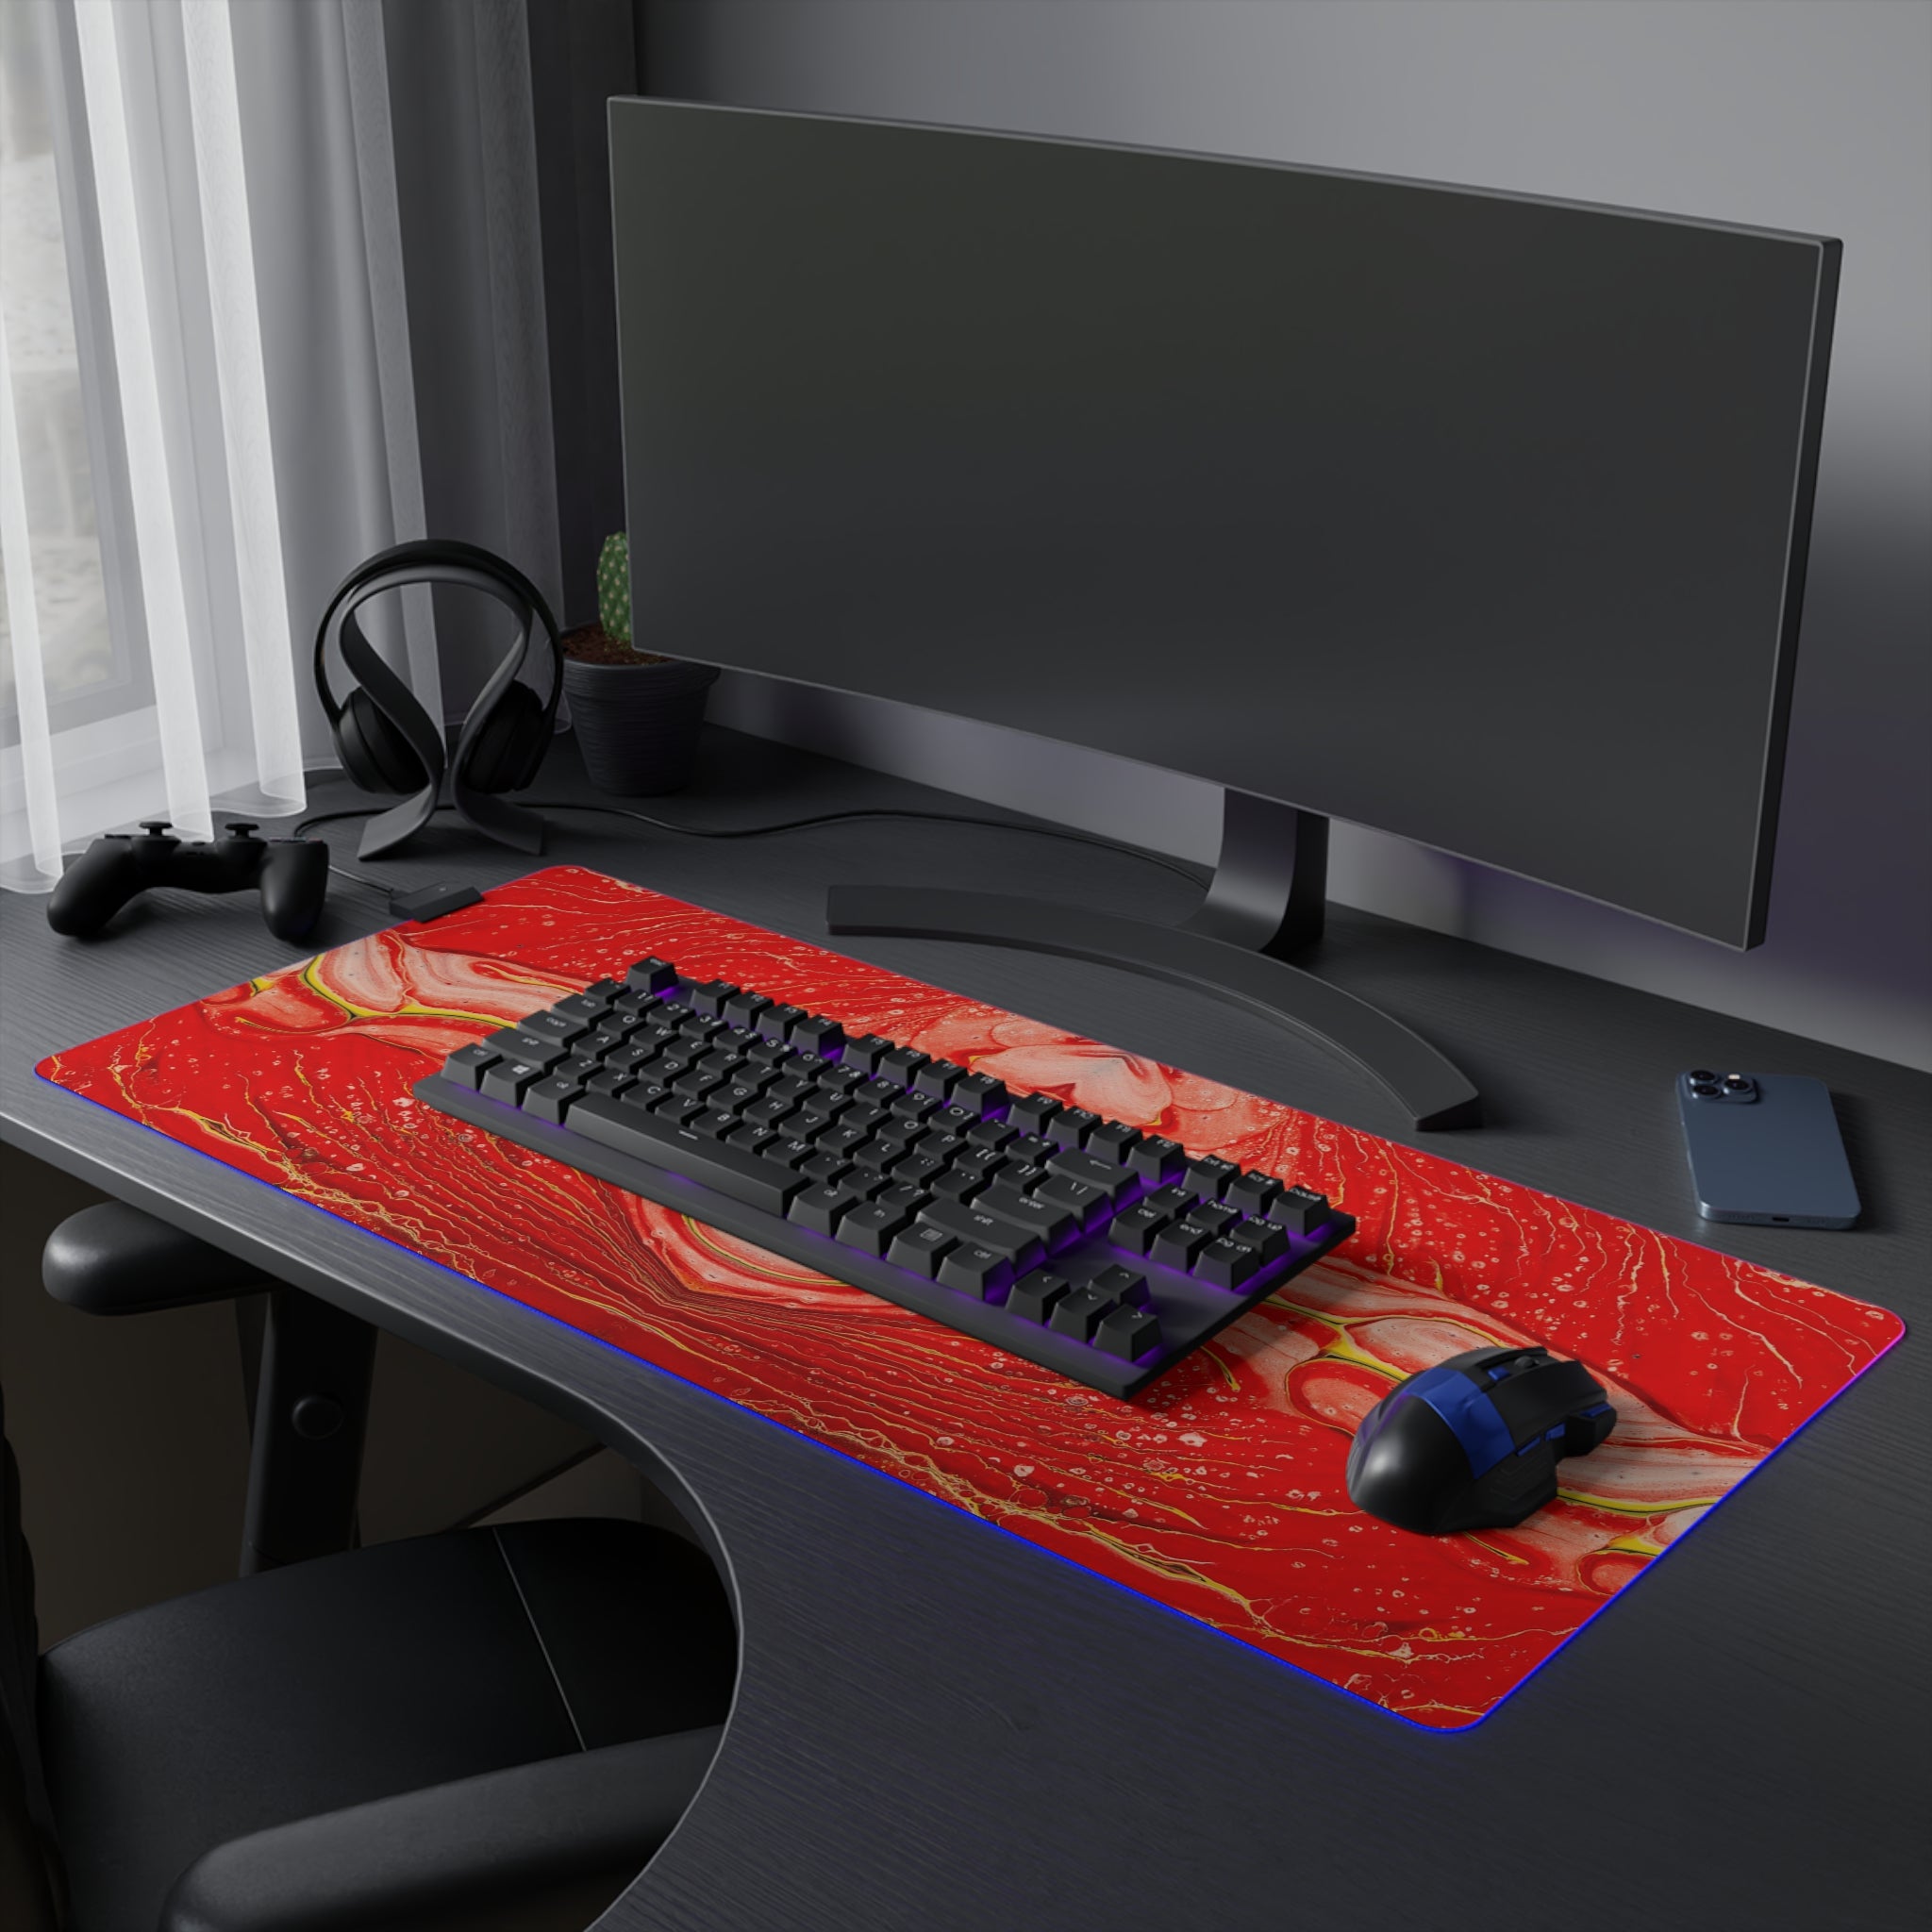 Cameron Creations - LED Gaming Mouse Pad - Galactica Organis - Concept 1